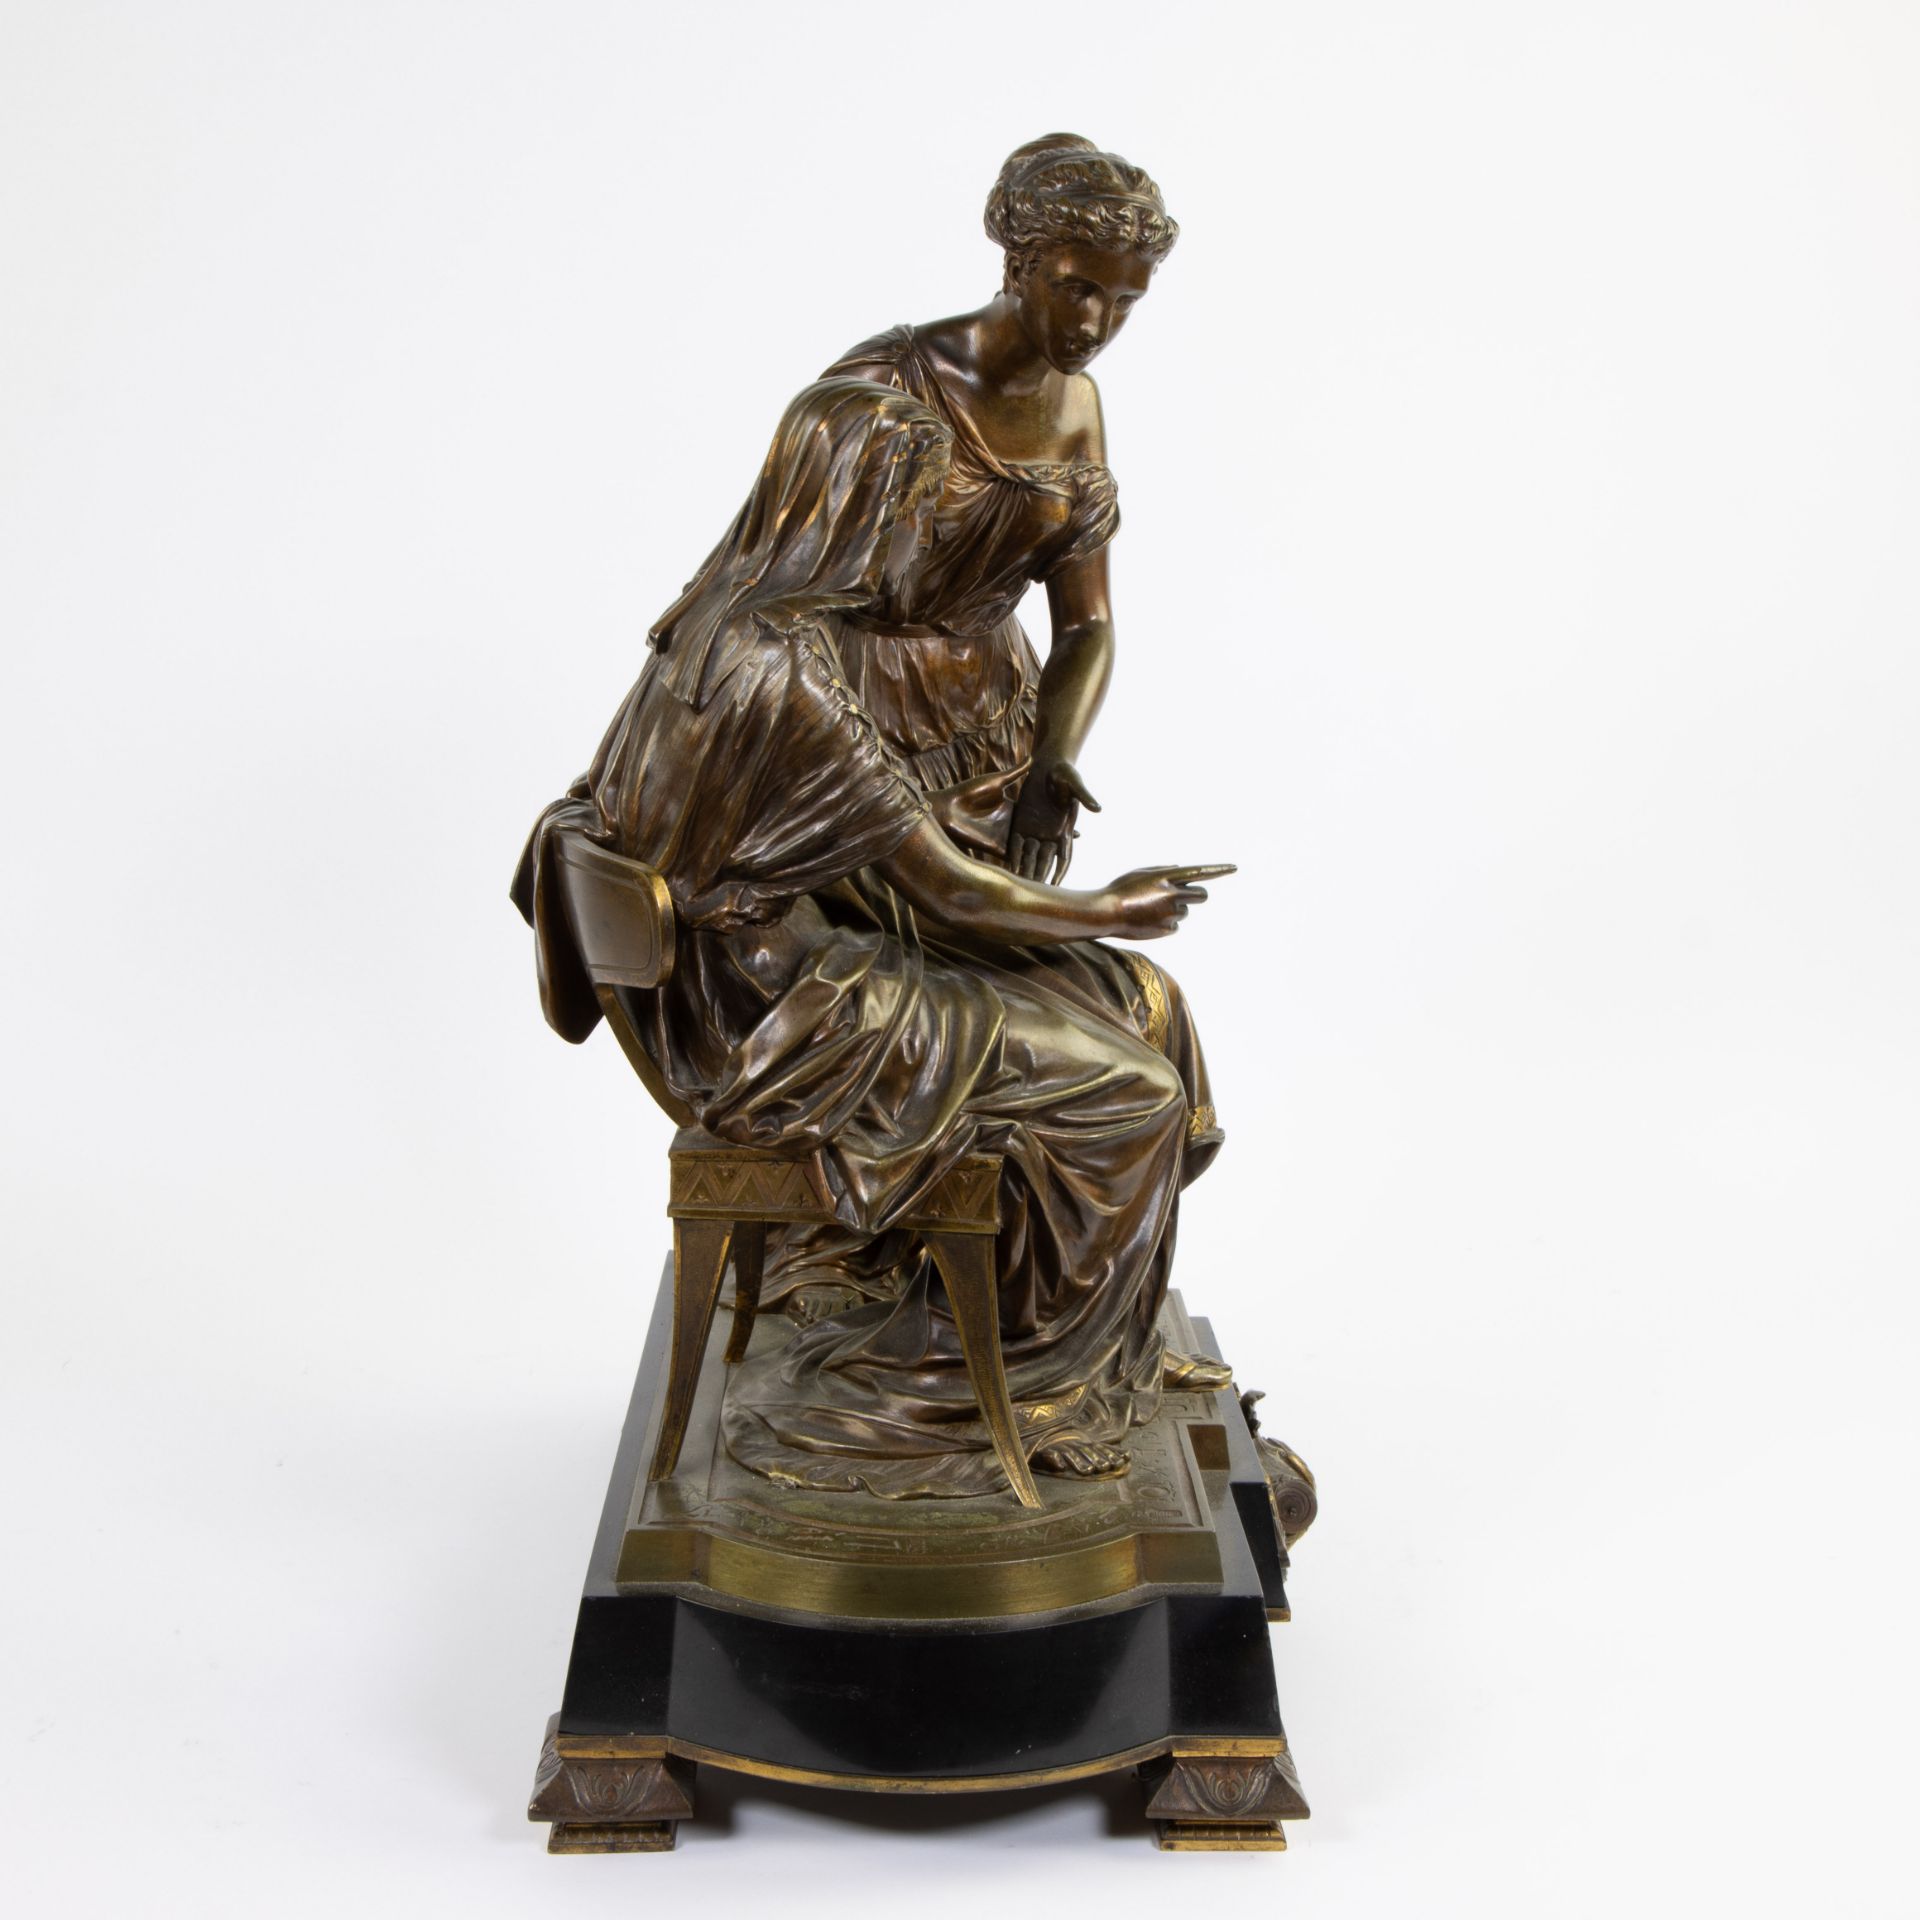 Very finely worked bronze sculpture Napoleon III, Retour d'Egypte or Egyptian Revival style - Image 5 of 5